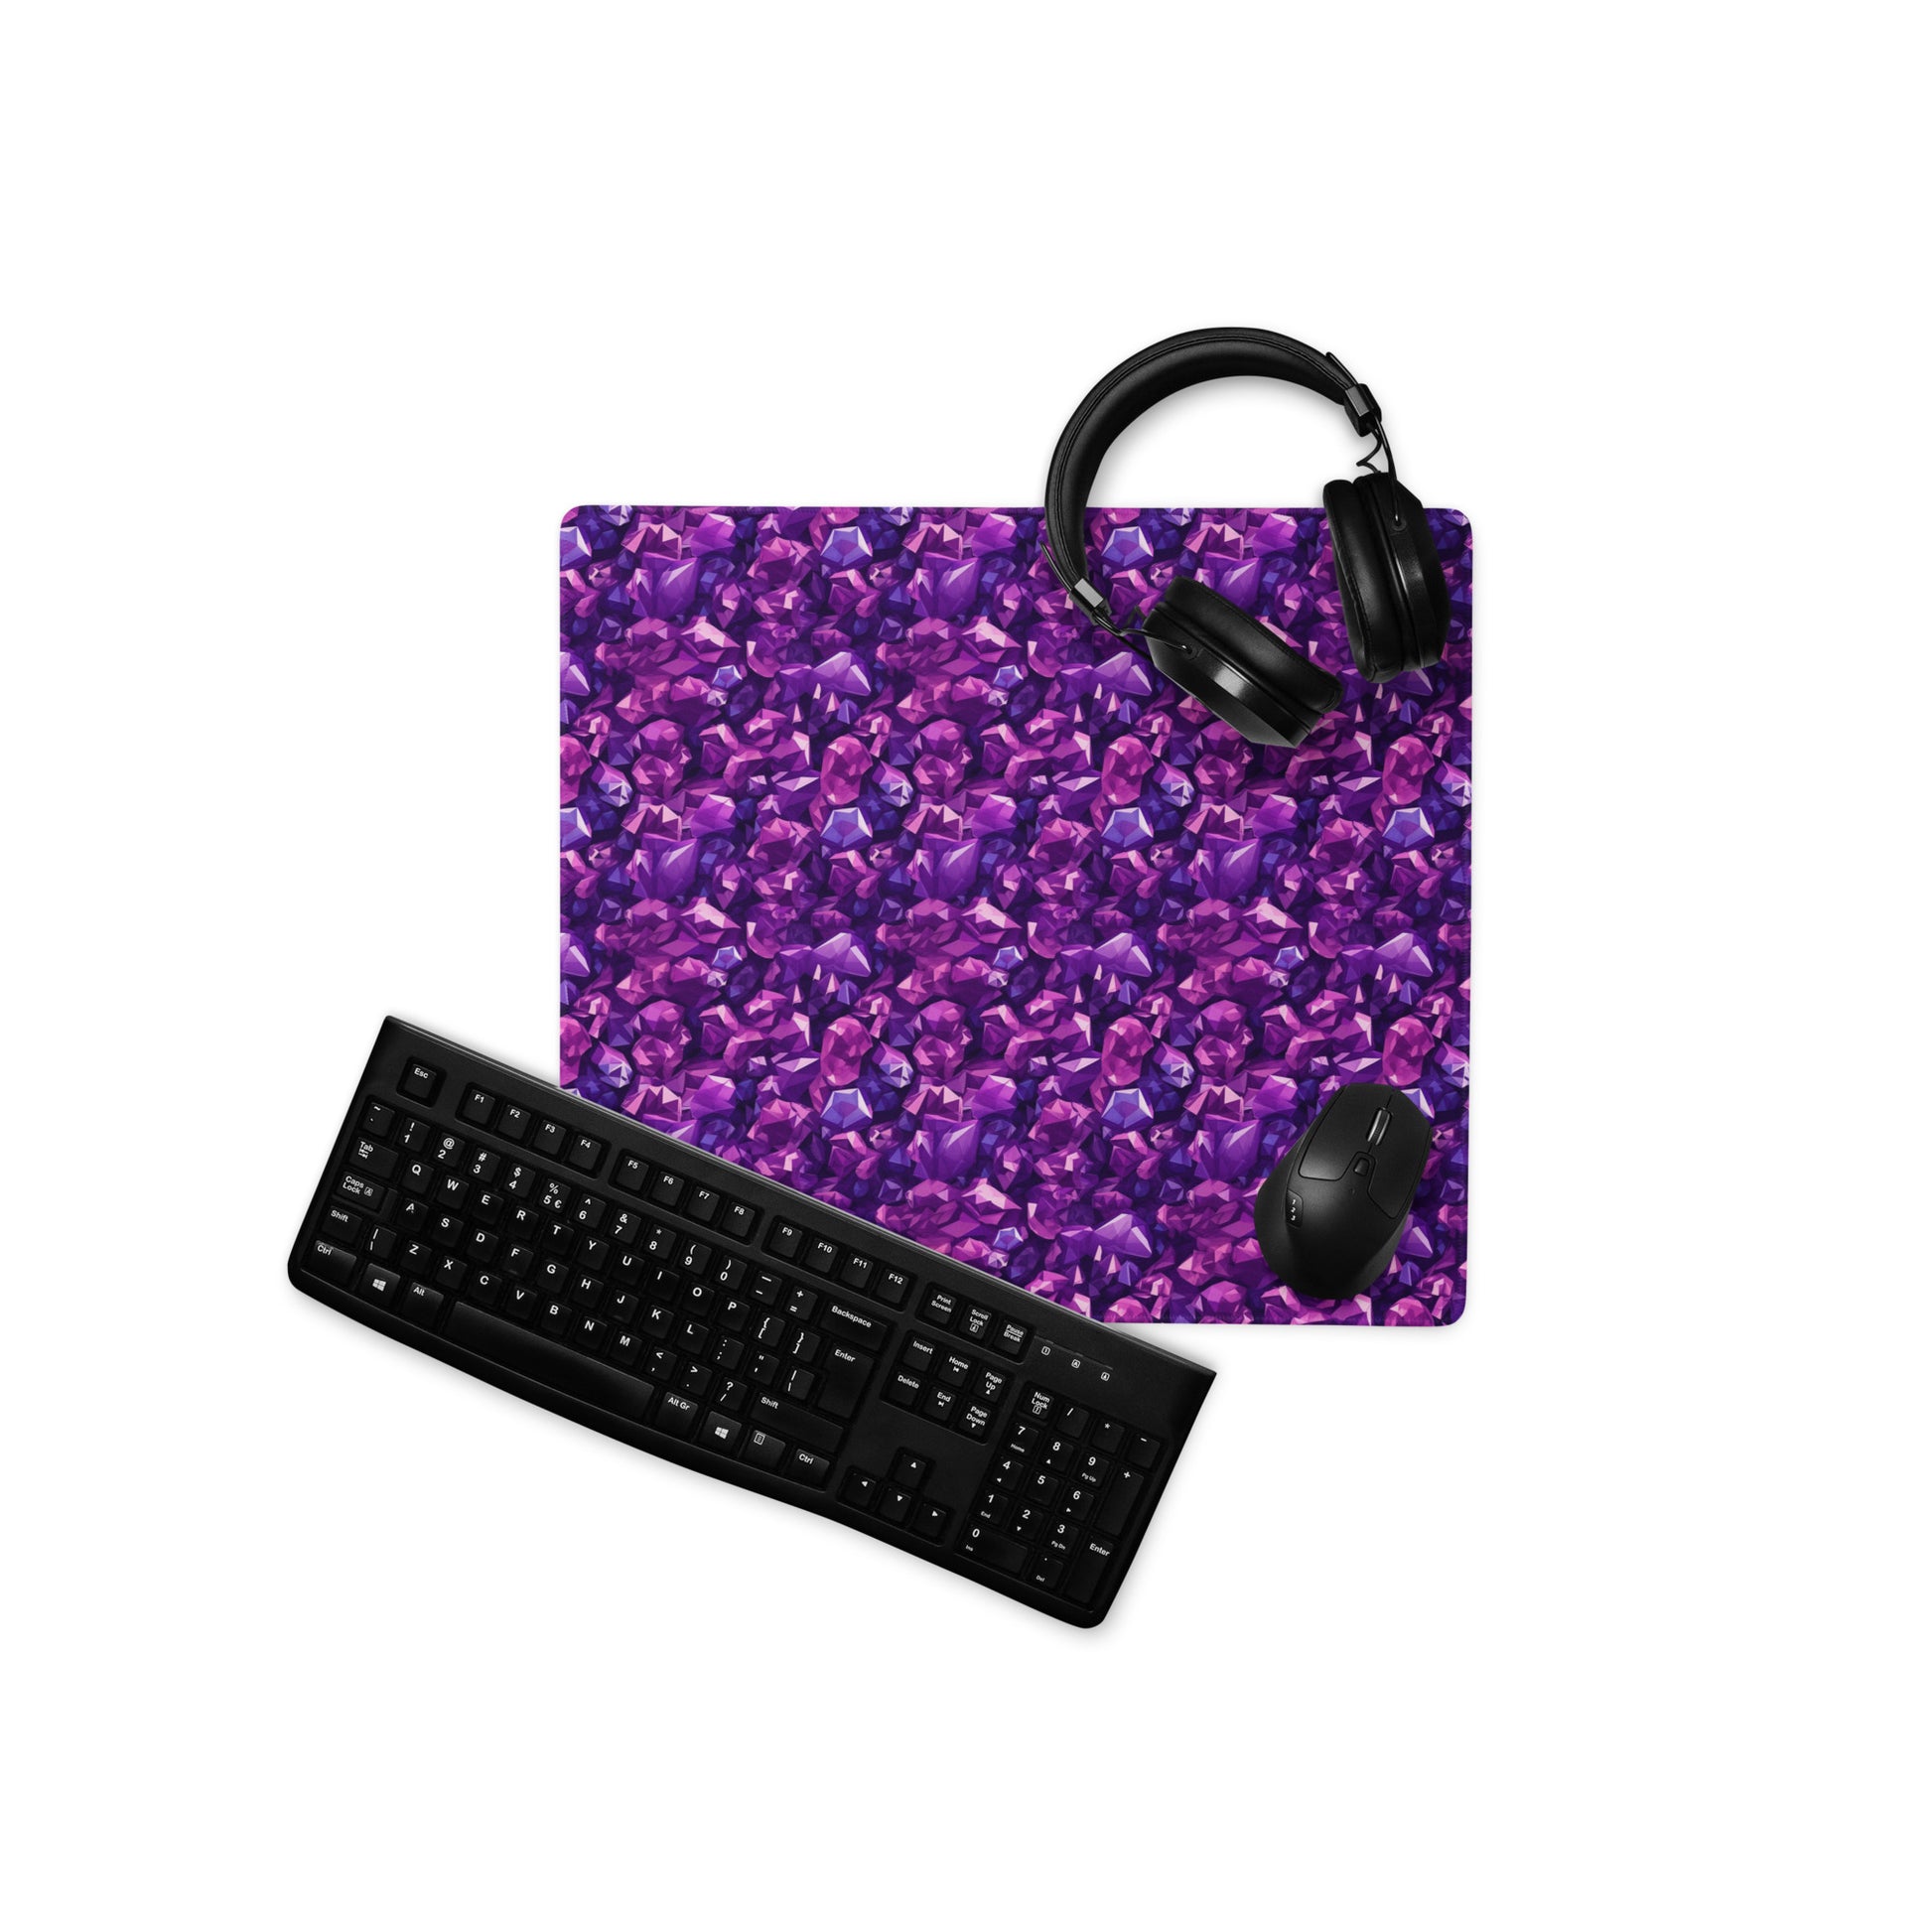 An 18" x 16" gaming desk pad with purple crystals. A keyboard, mouse, and headphones sit on it.